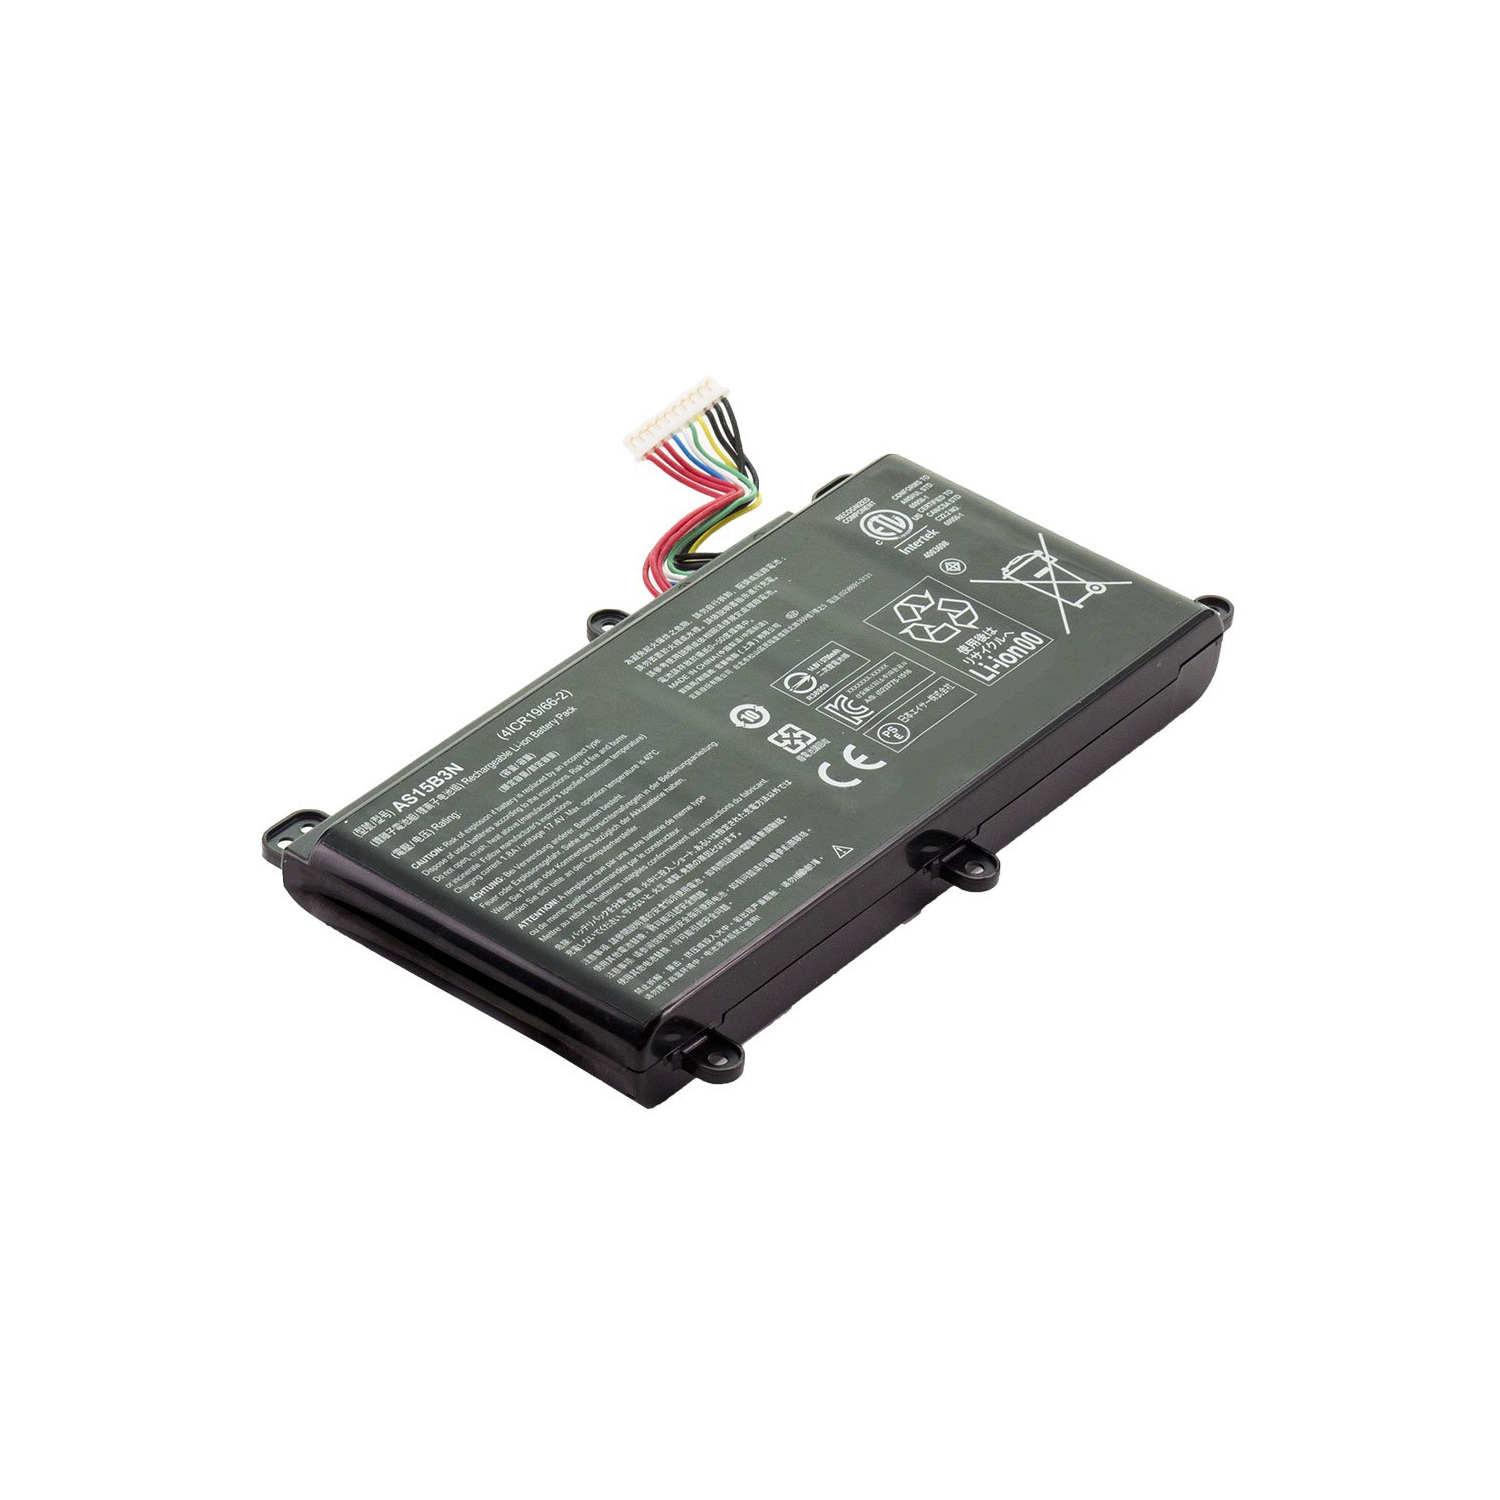 Laptop Battery Replacement for Acer Predator 15 G9-592-74NV, AS15B3N, KT.00803.004, KT.00803.005